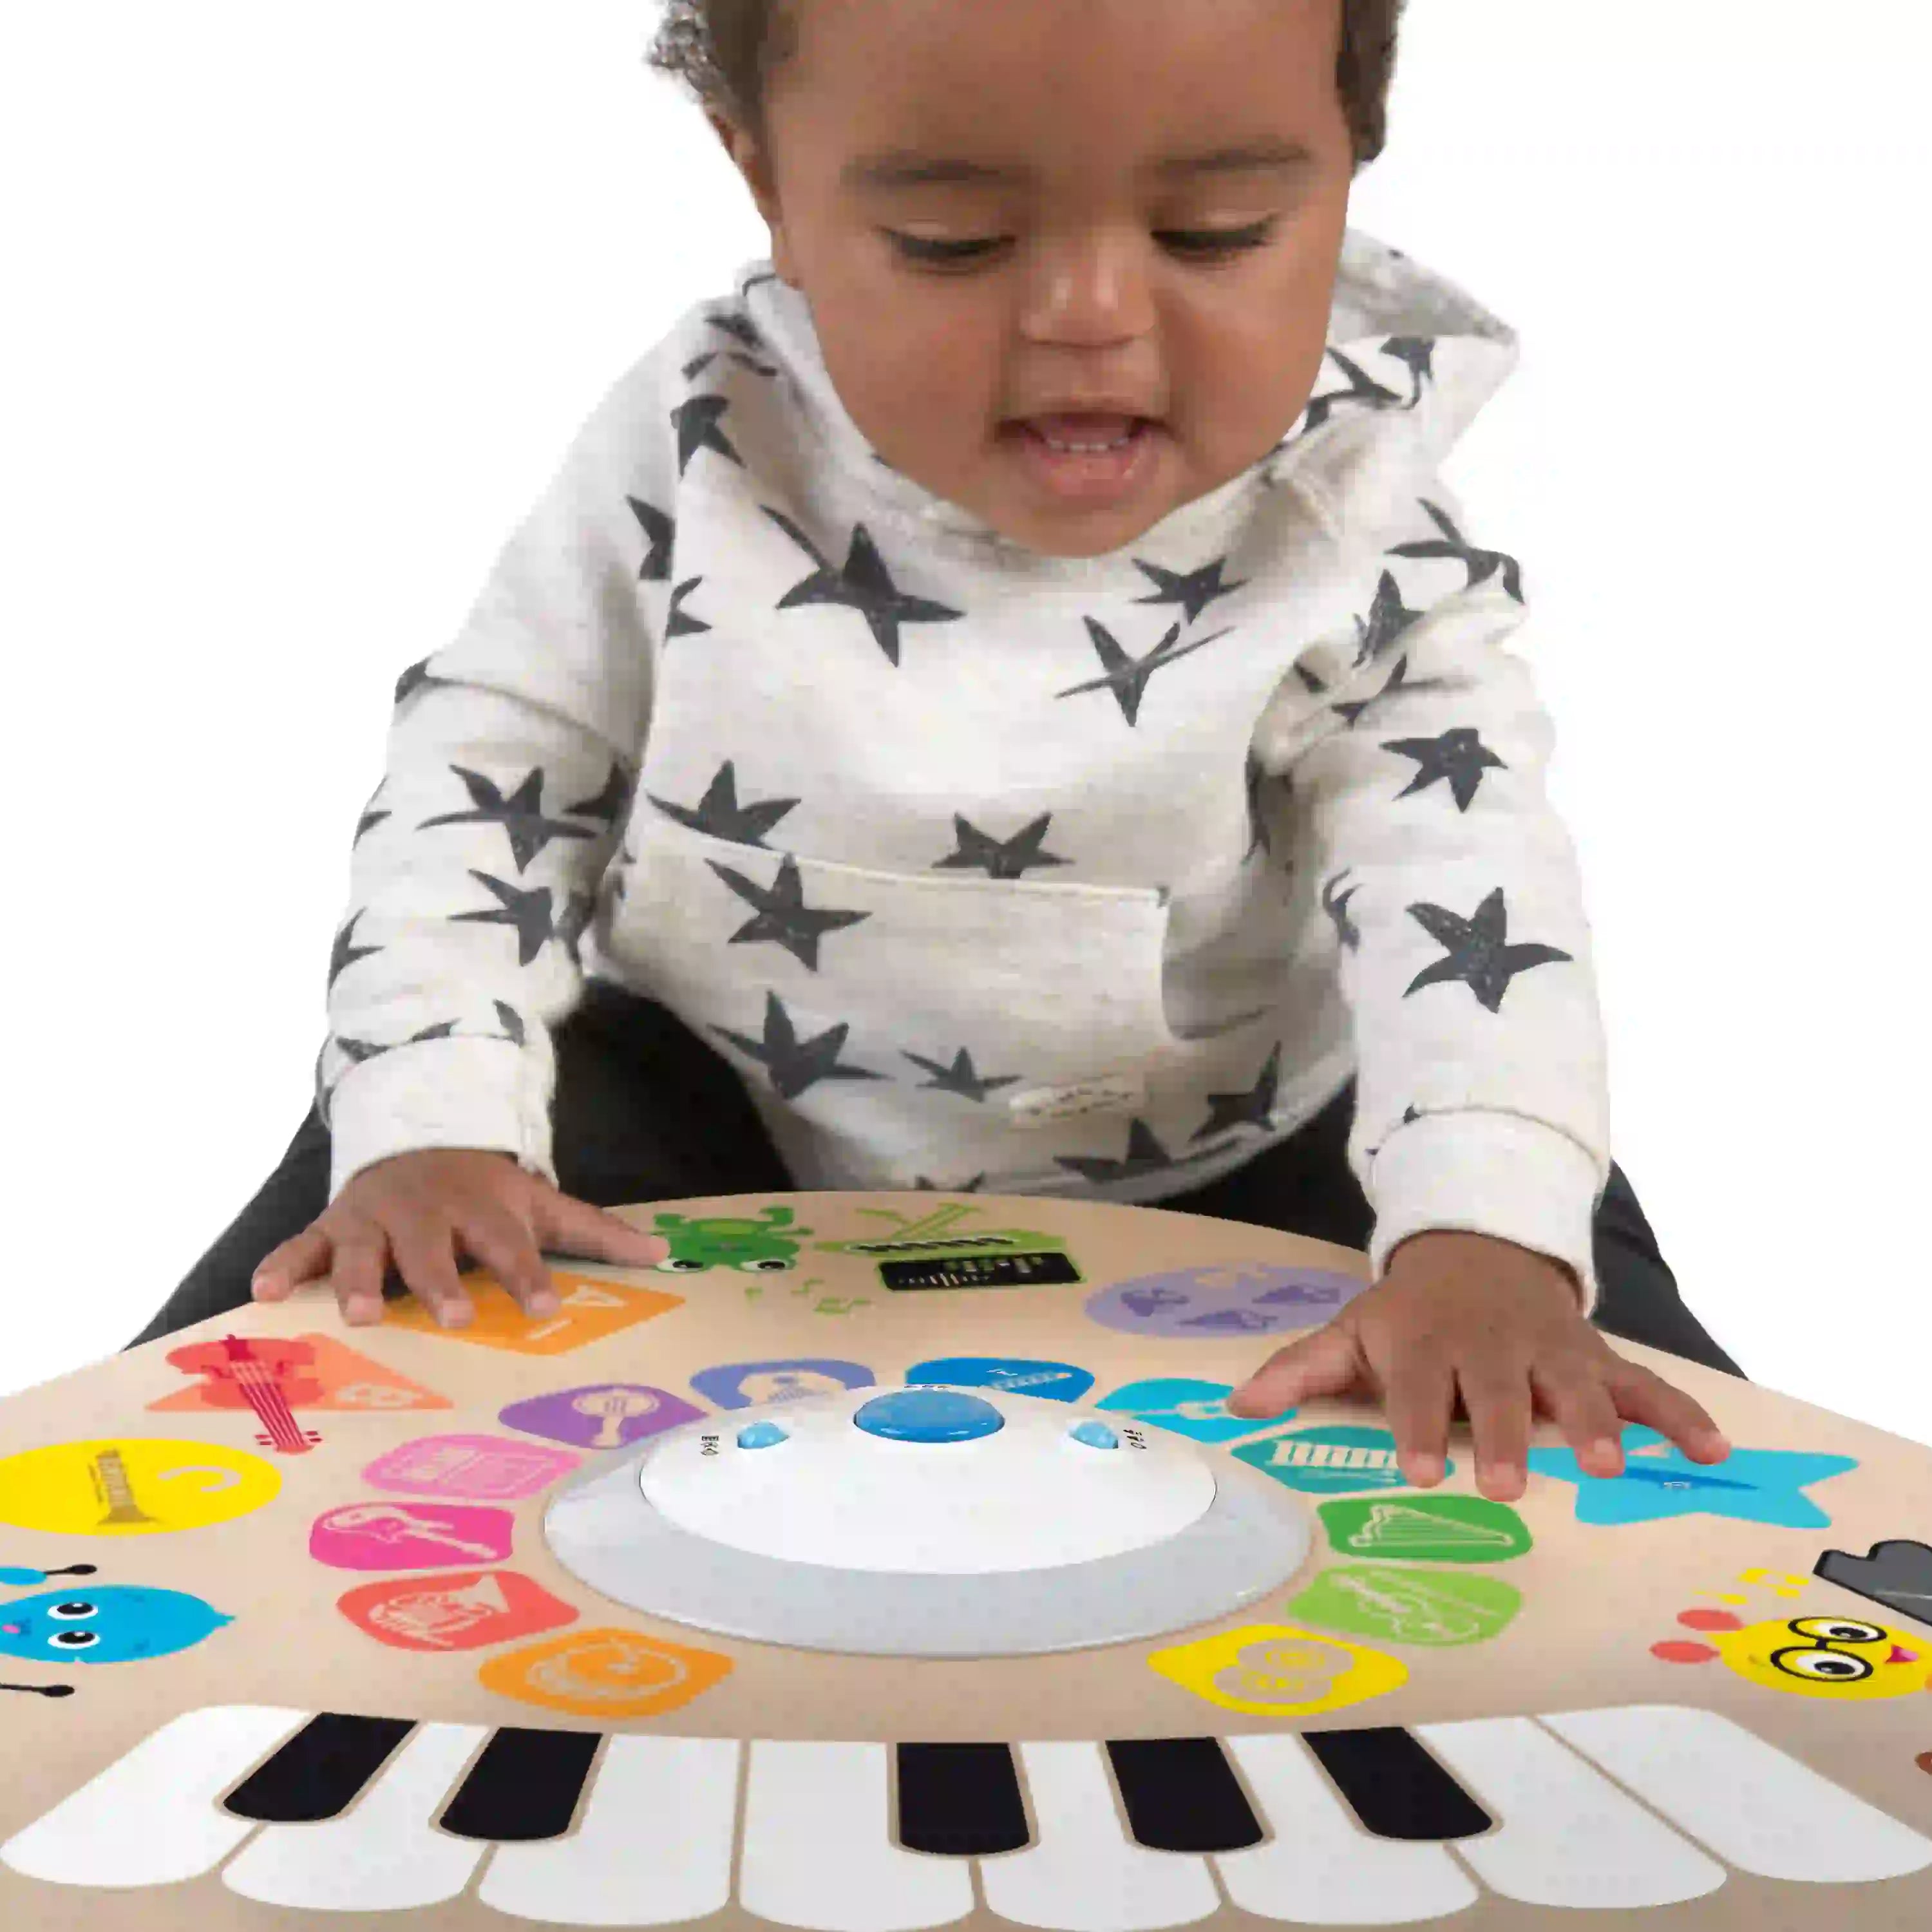 Clever Composer Tune Table Magic Touch Activity Toy